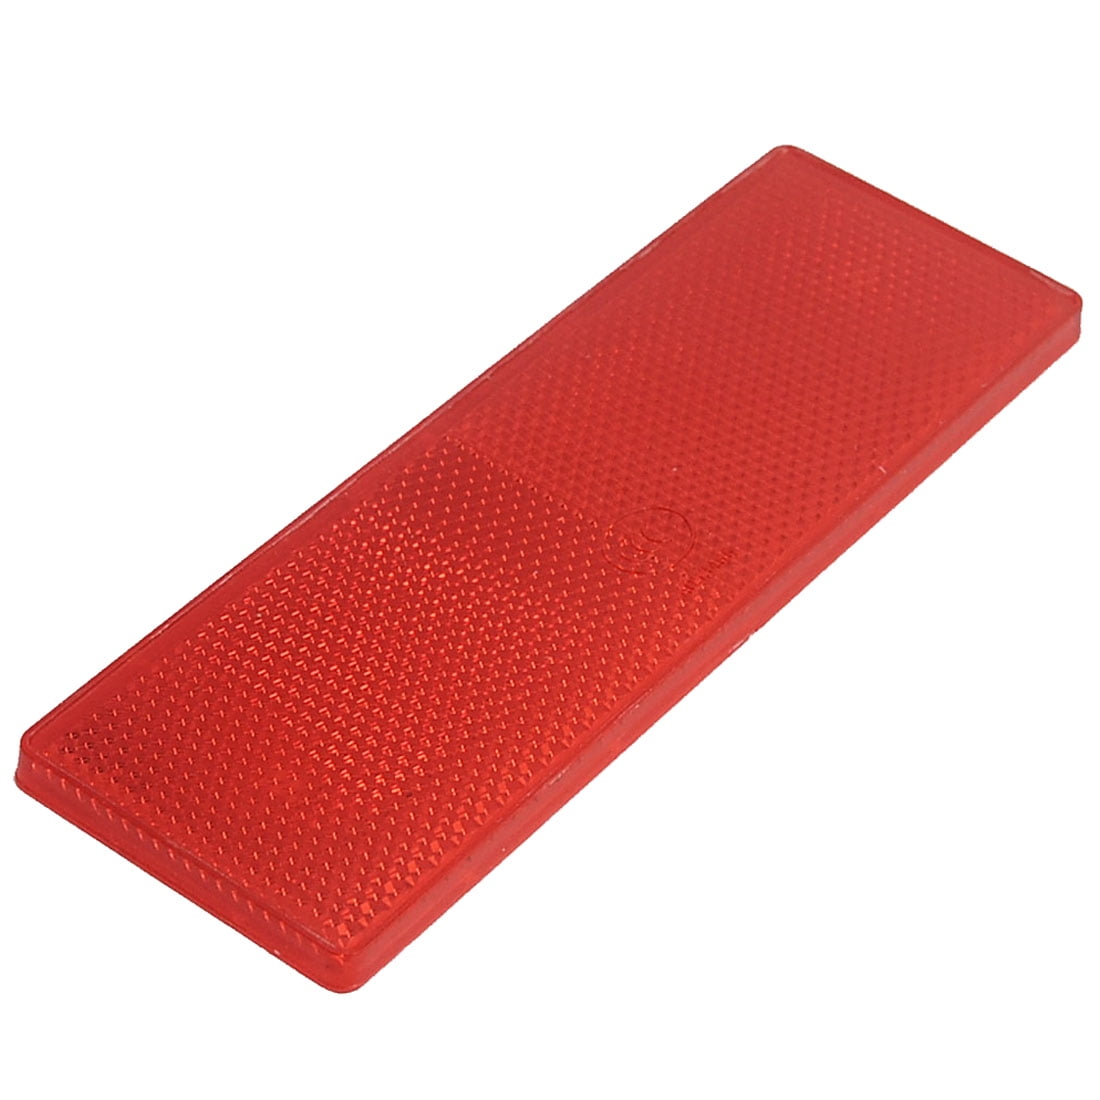 Plastic Rectangle Reflective Warning Reflector Red for Vehicle Safety ...